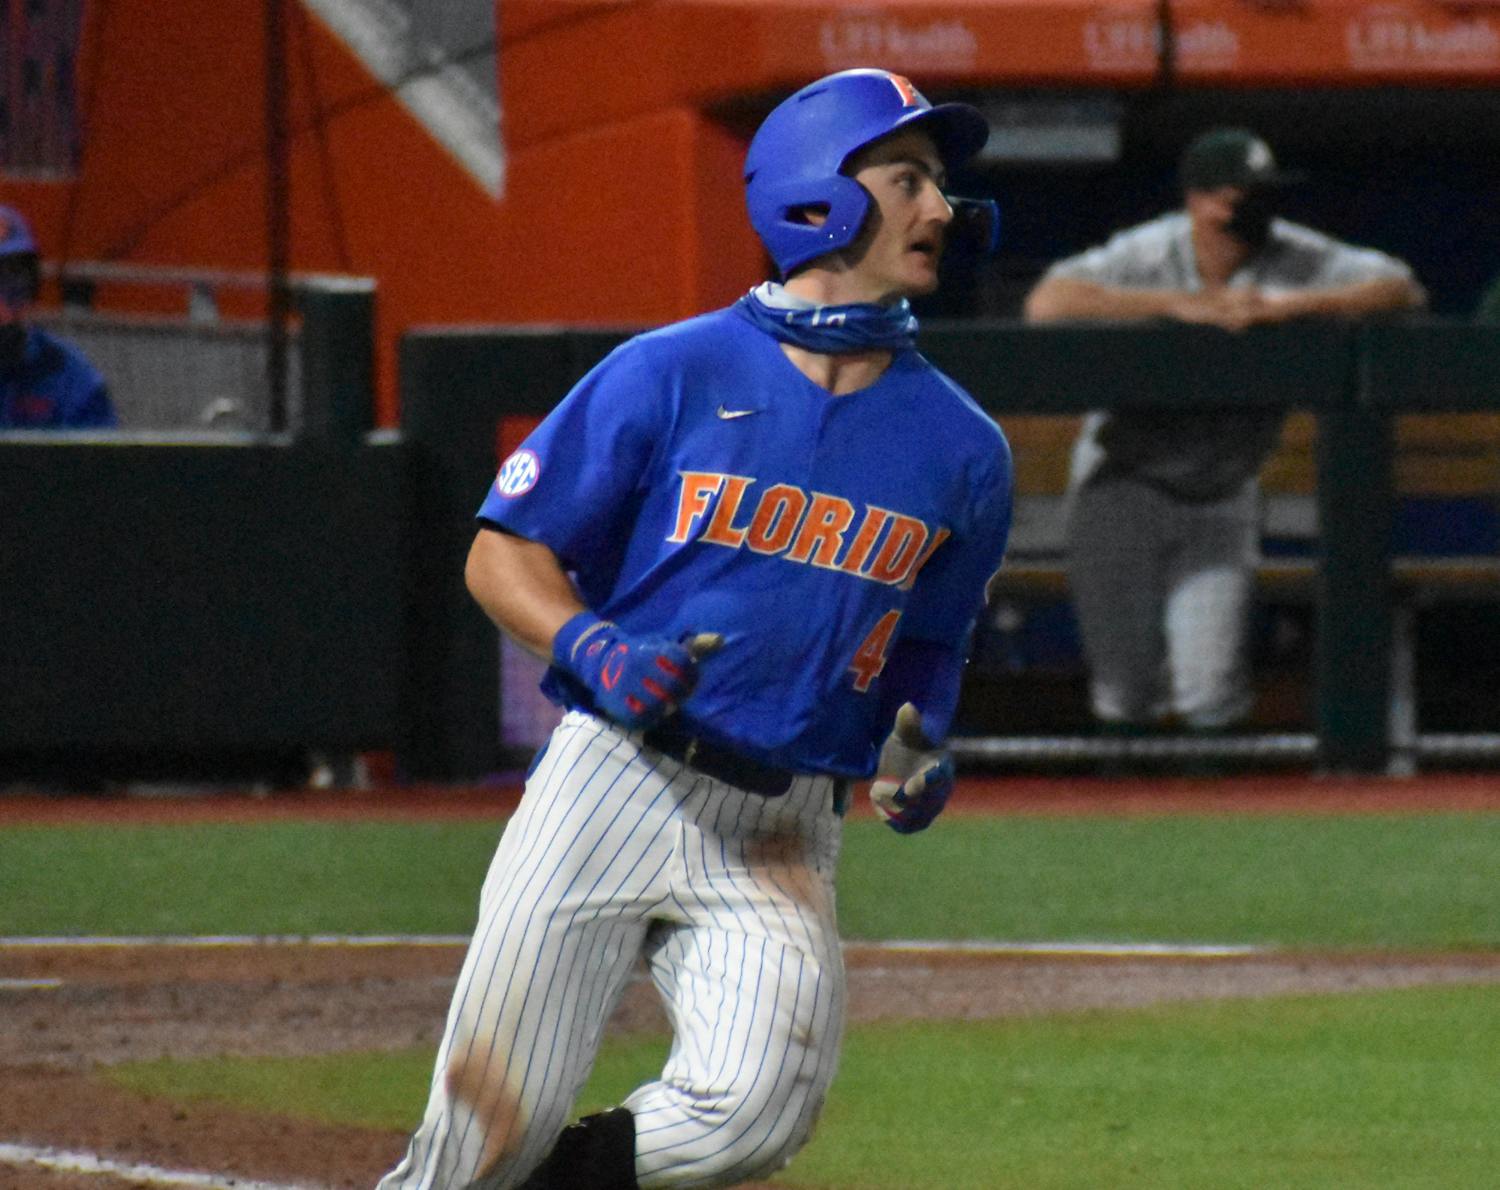 Jud Fabian rounds second base in a game against Jacksonville. March 2021. He passed Mike Zunino for fifth all-time in home runs during his career at UF on Tuesday against Stetson.